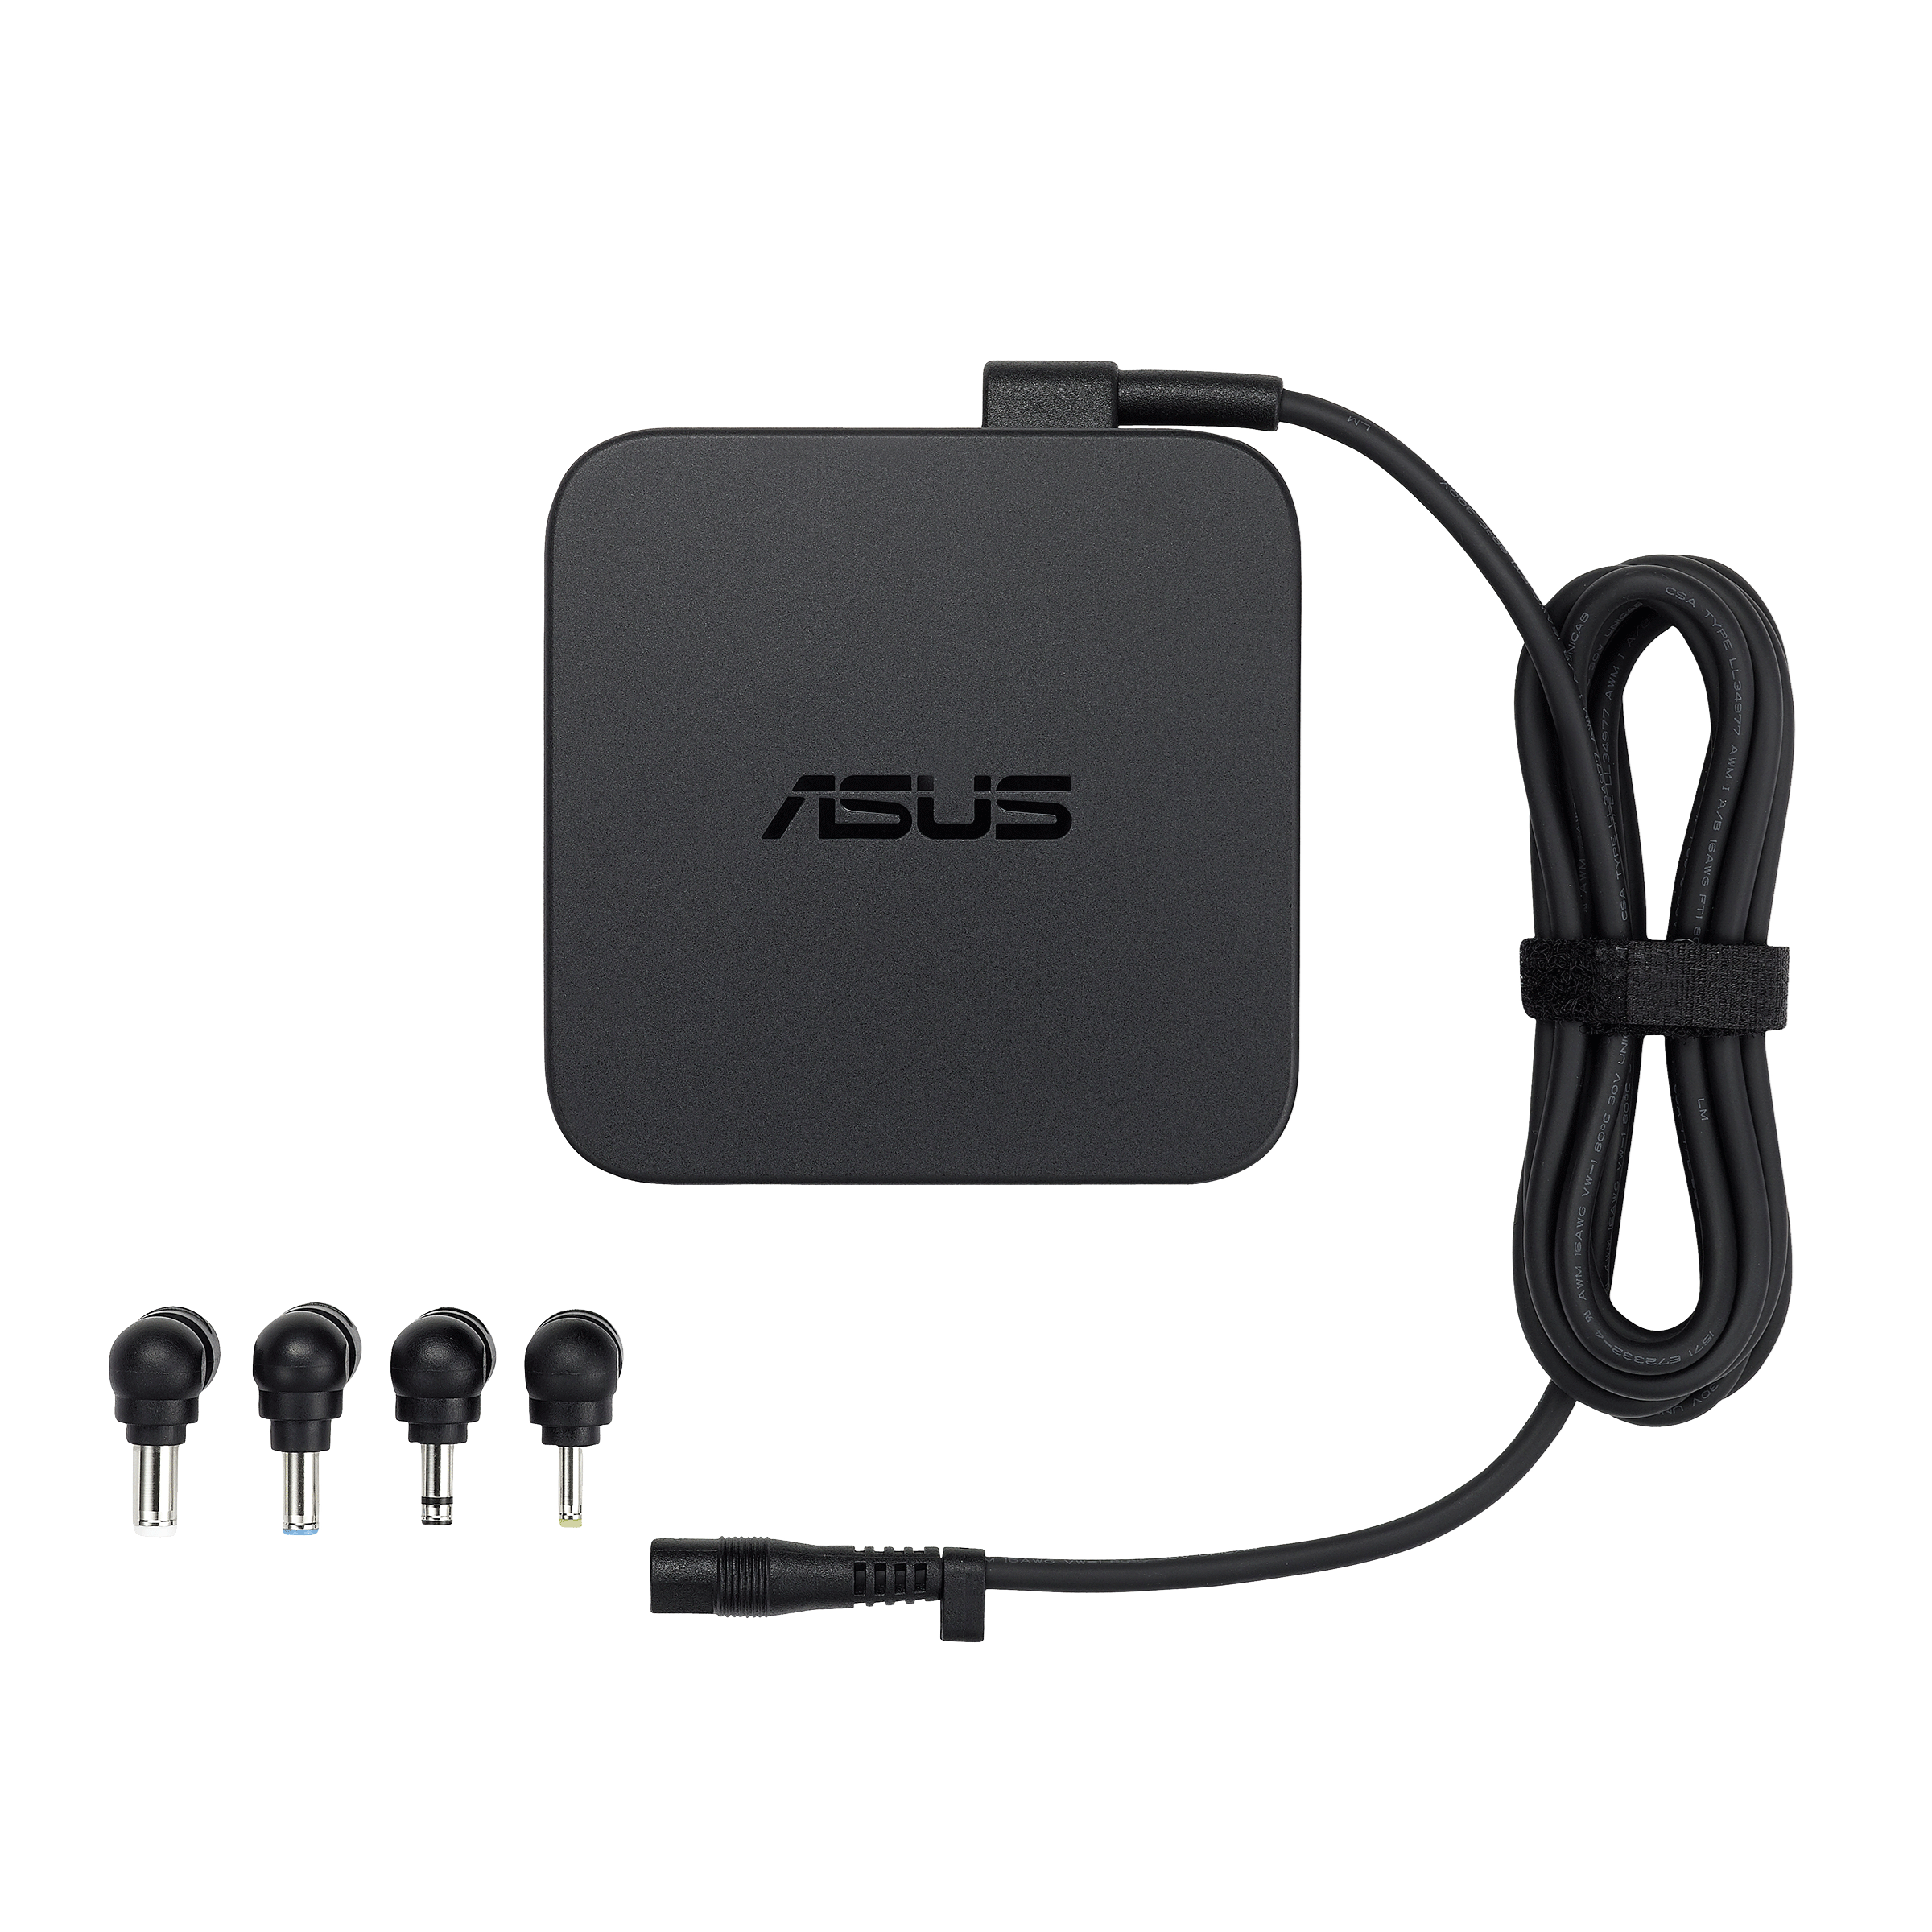 til stede Uden tvivl Cyberplads Adapters and Chargers - All series｜ASUS Global